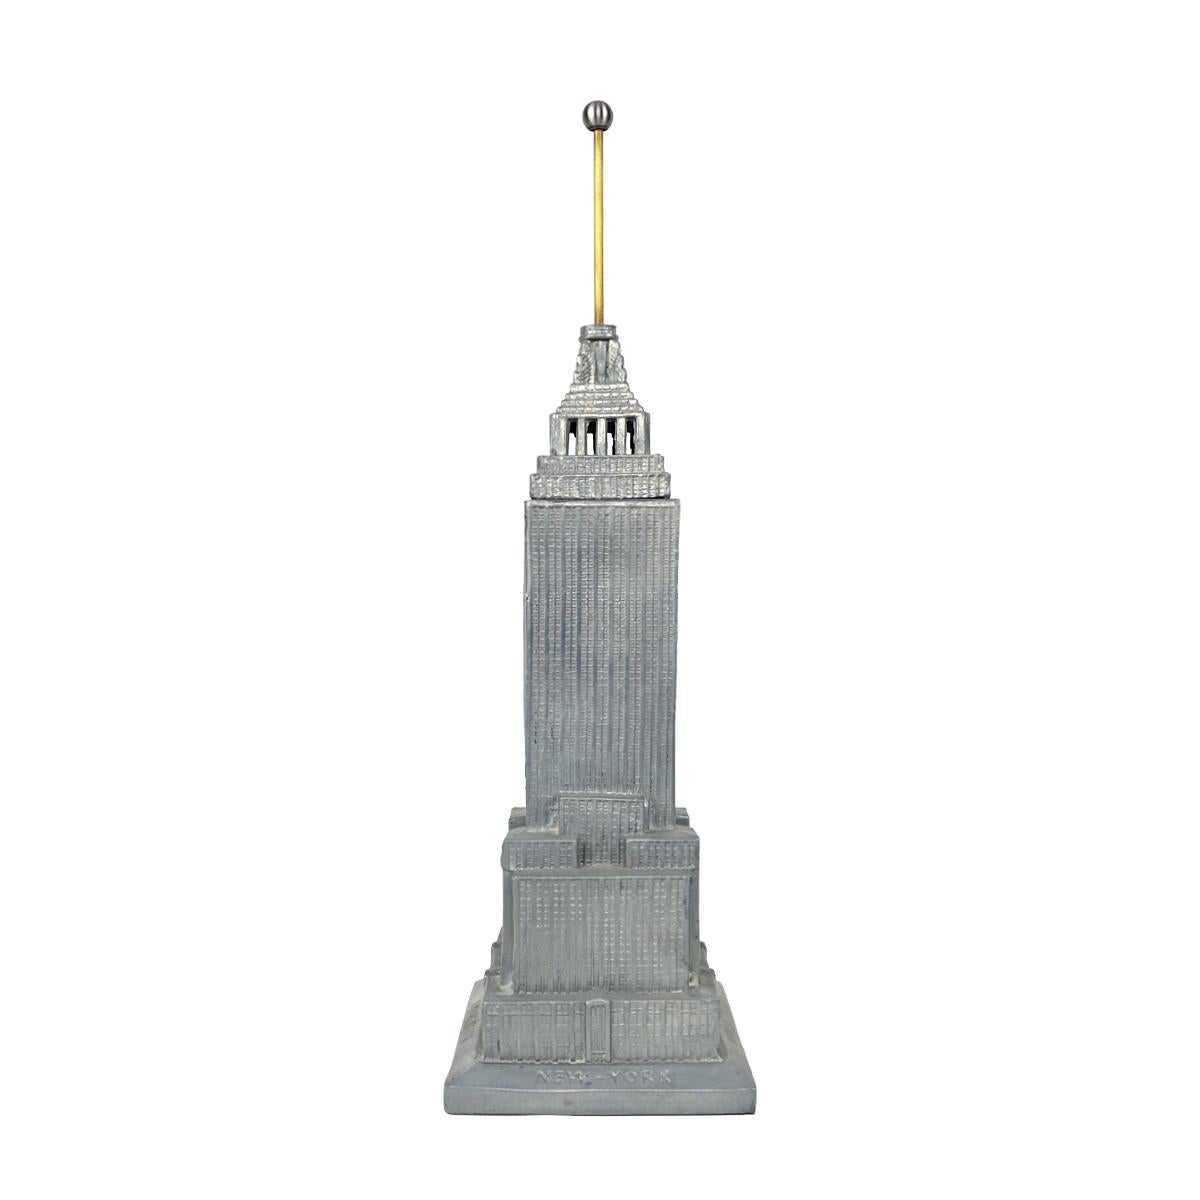 Late 20th Century Table Lamp by Sarsaparilla Deco Designs Model of Empire State Building For Sale